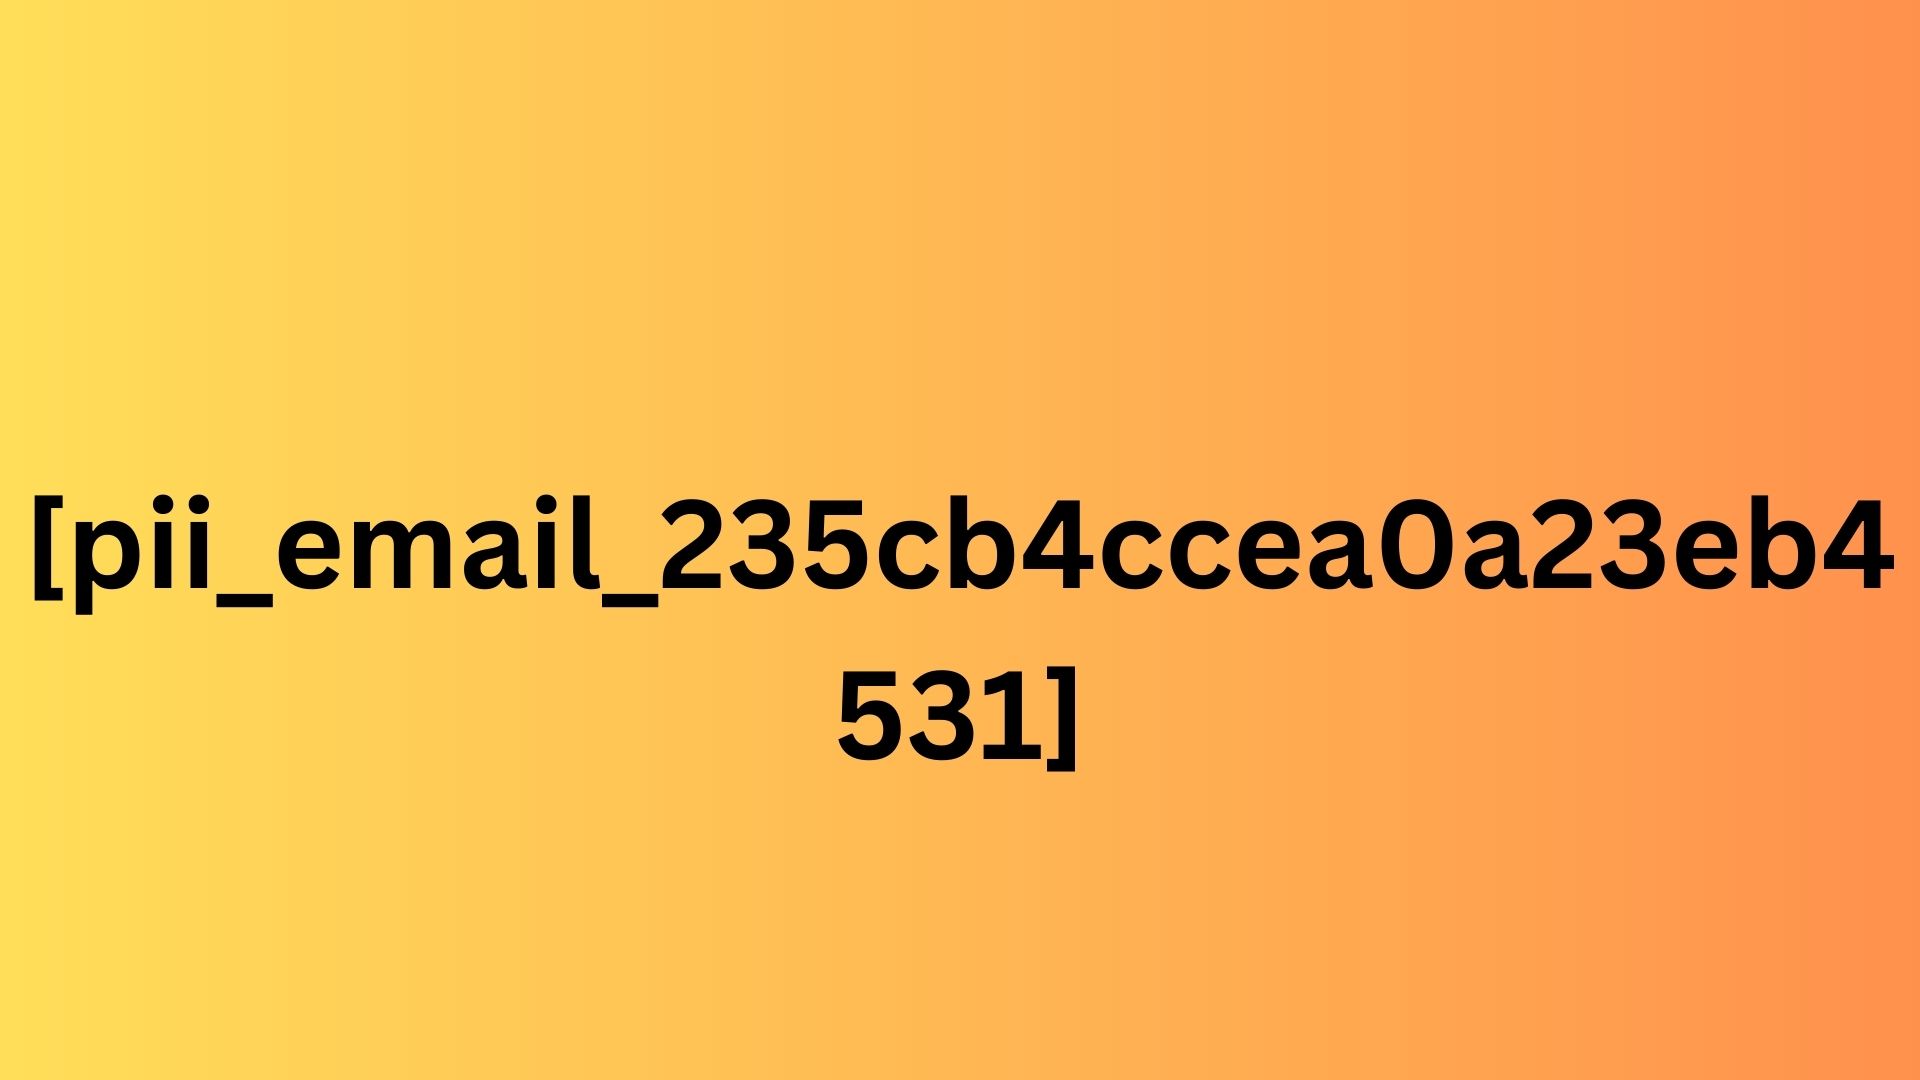 [pii_email_235cb4ccea0a23eb4531]